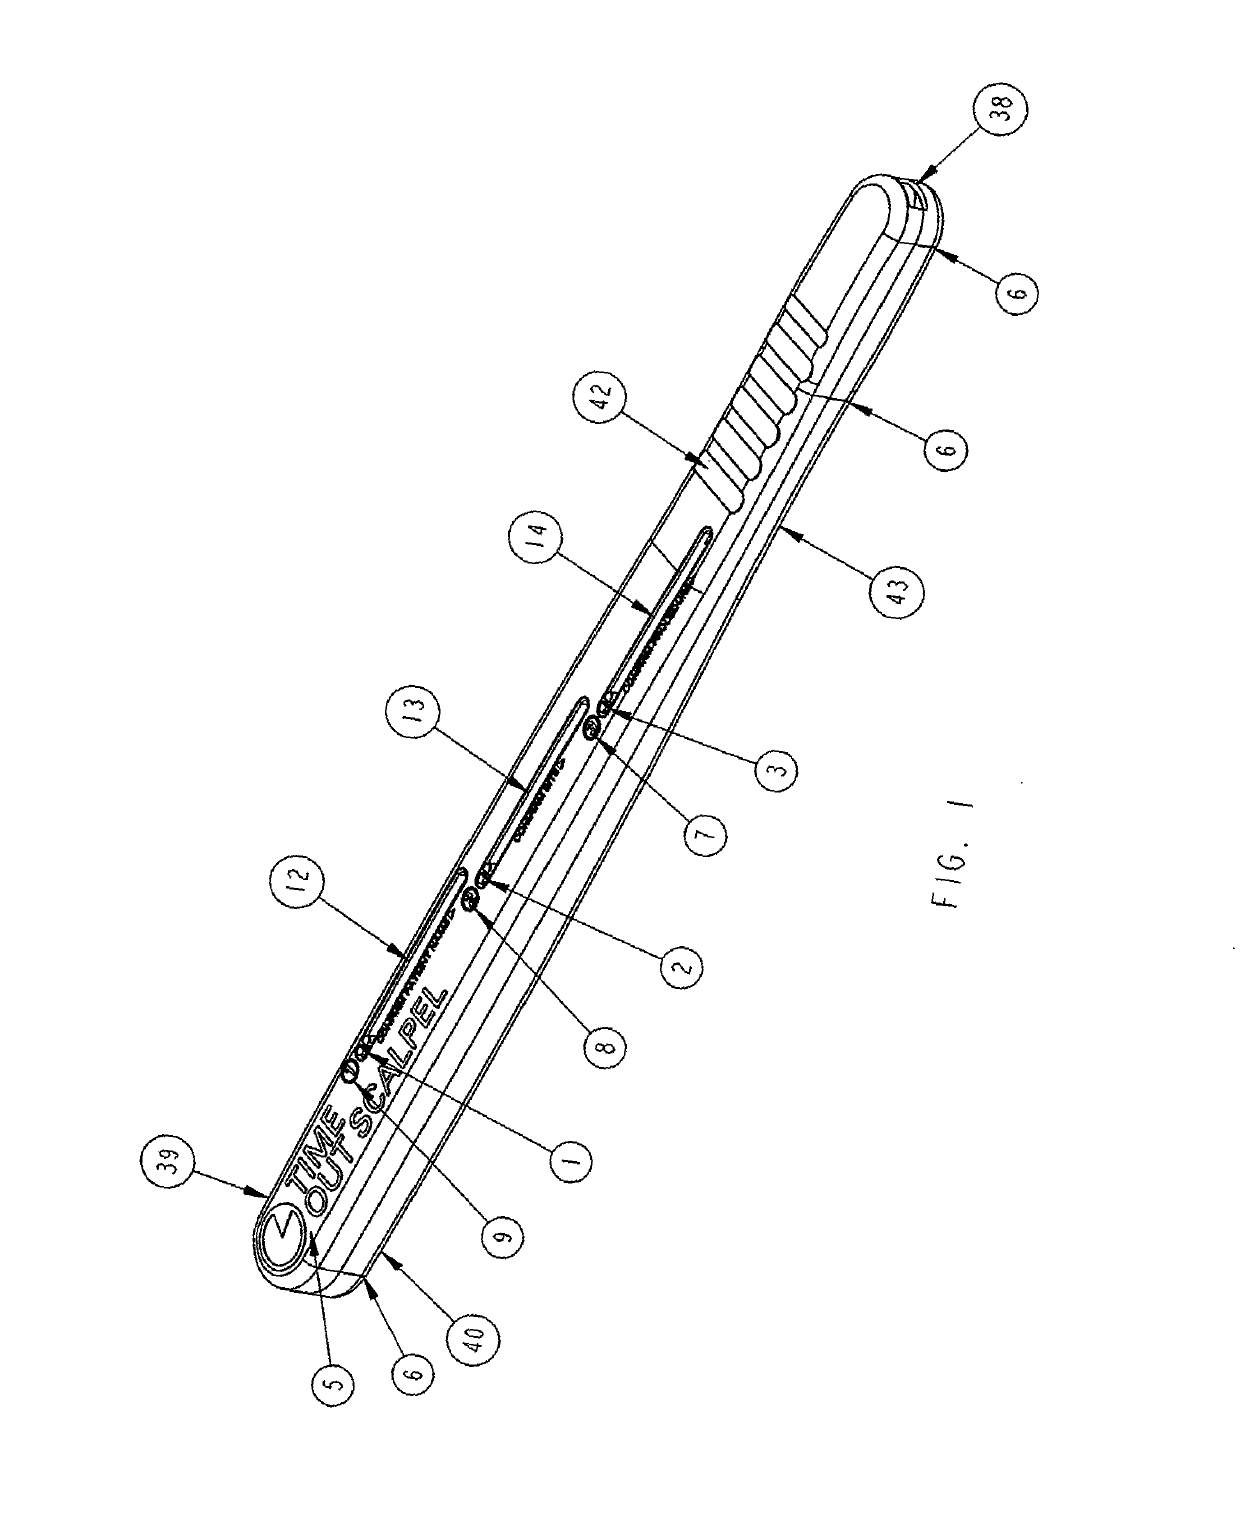 Surgical scalpel handle assembly system and method for requiring a verification process